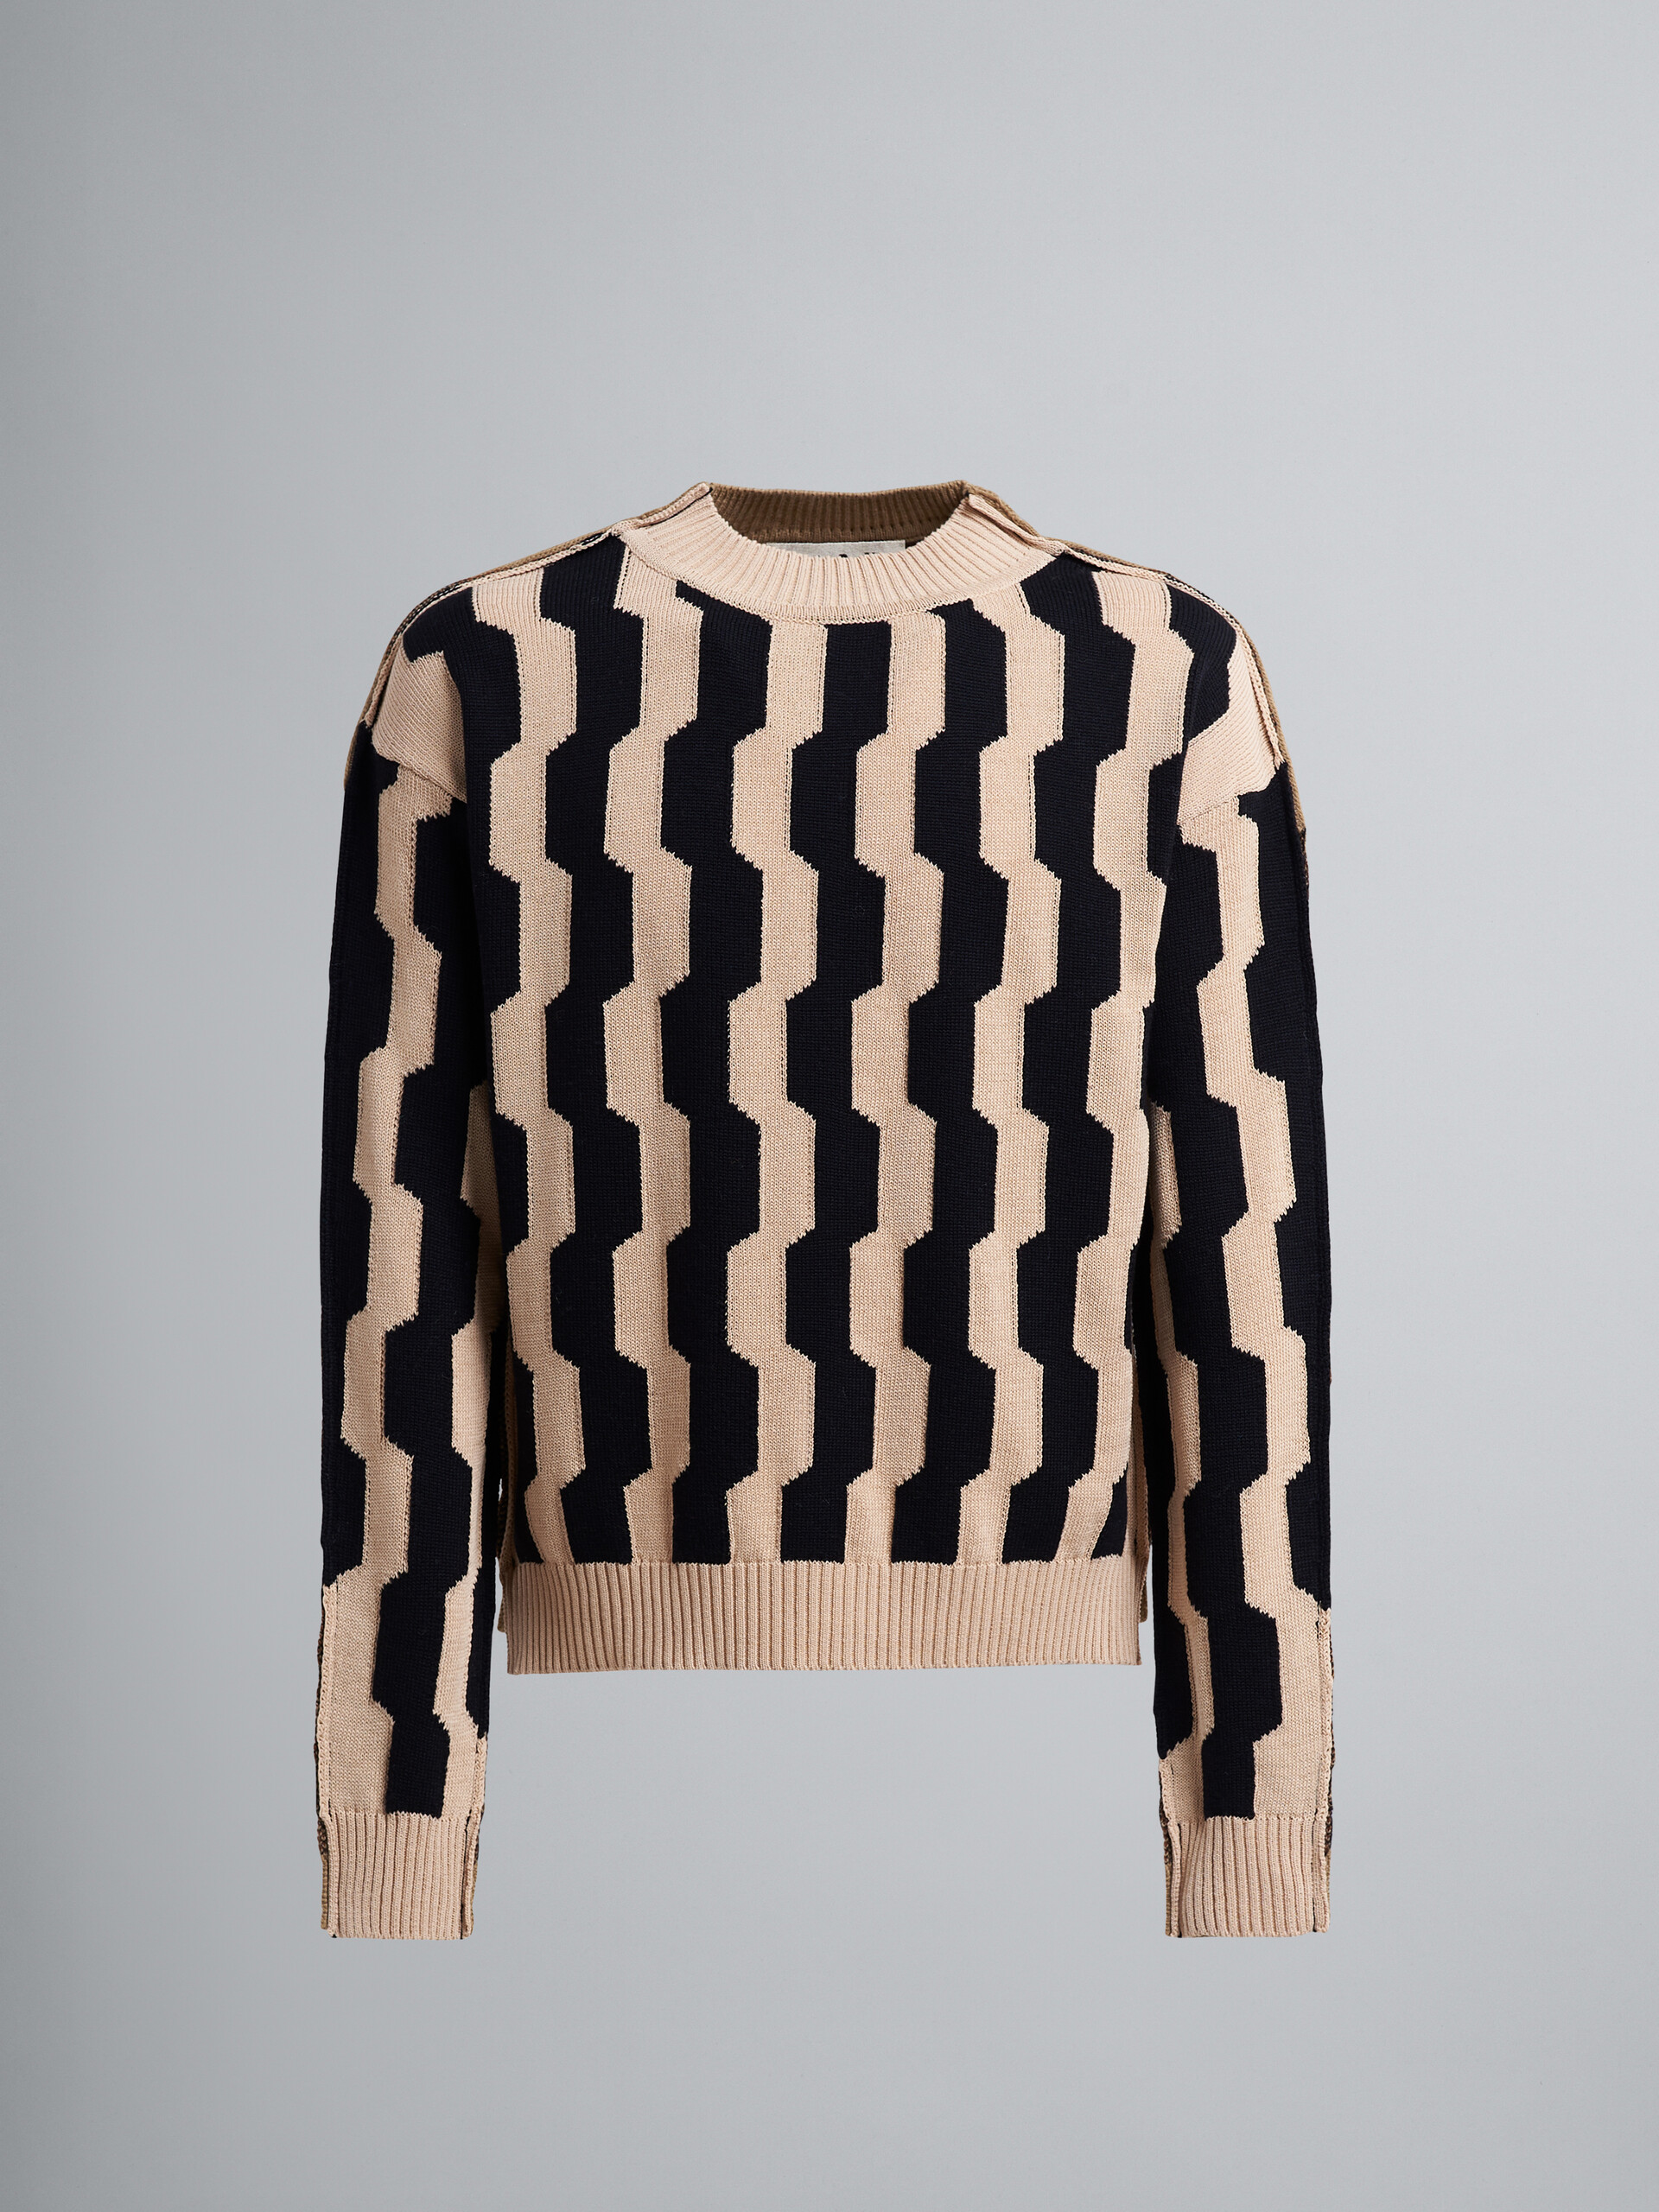 Beige and black crepe and Shetland wool sweater - Pullovers - Image 1